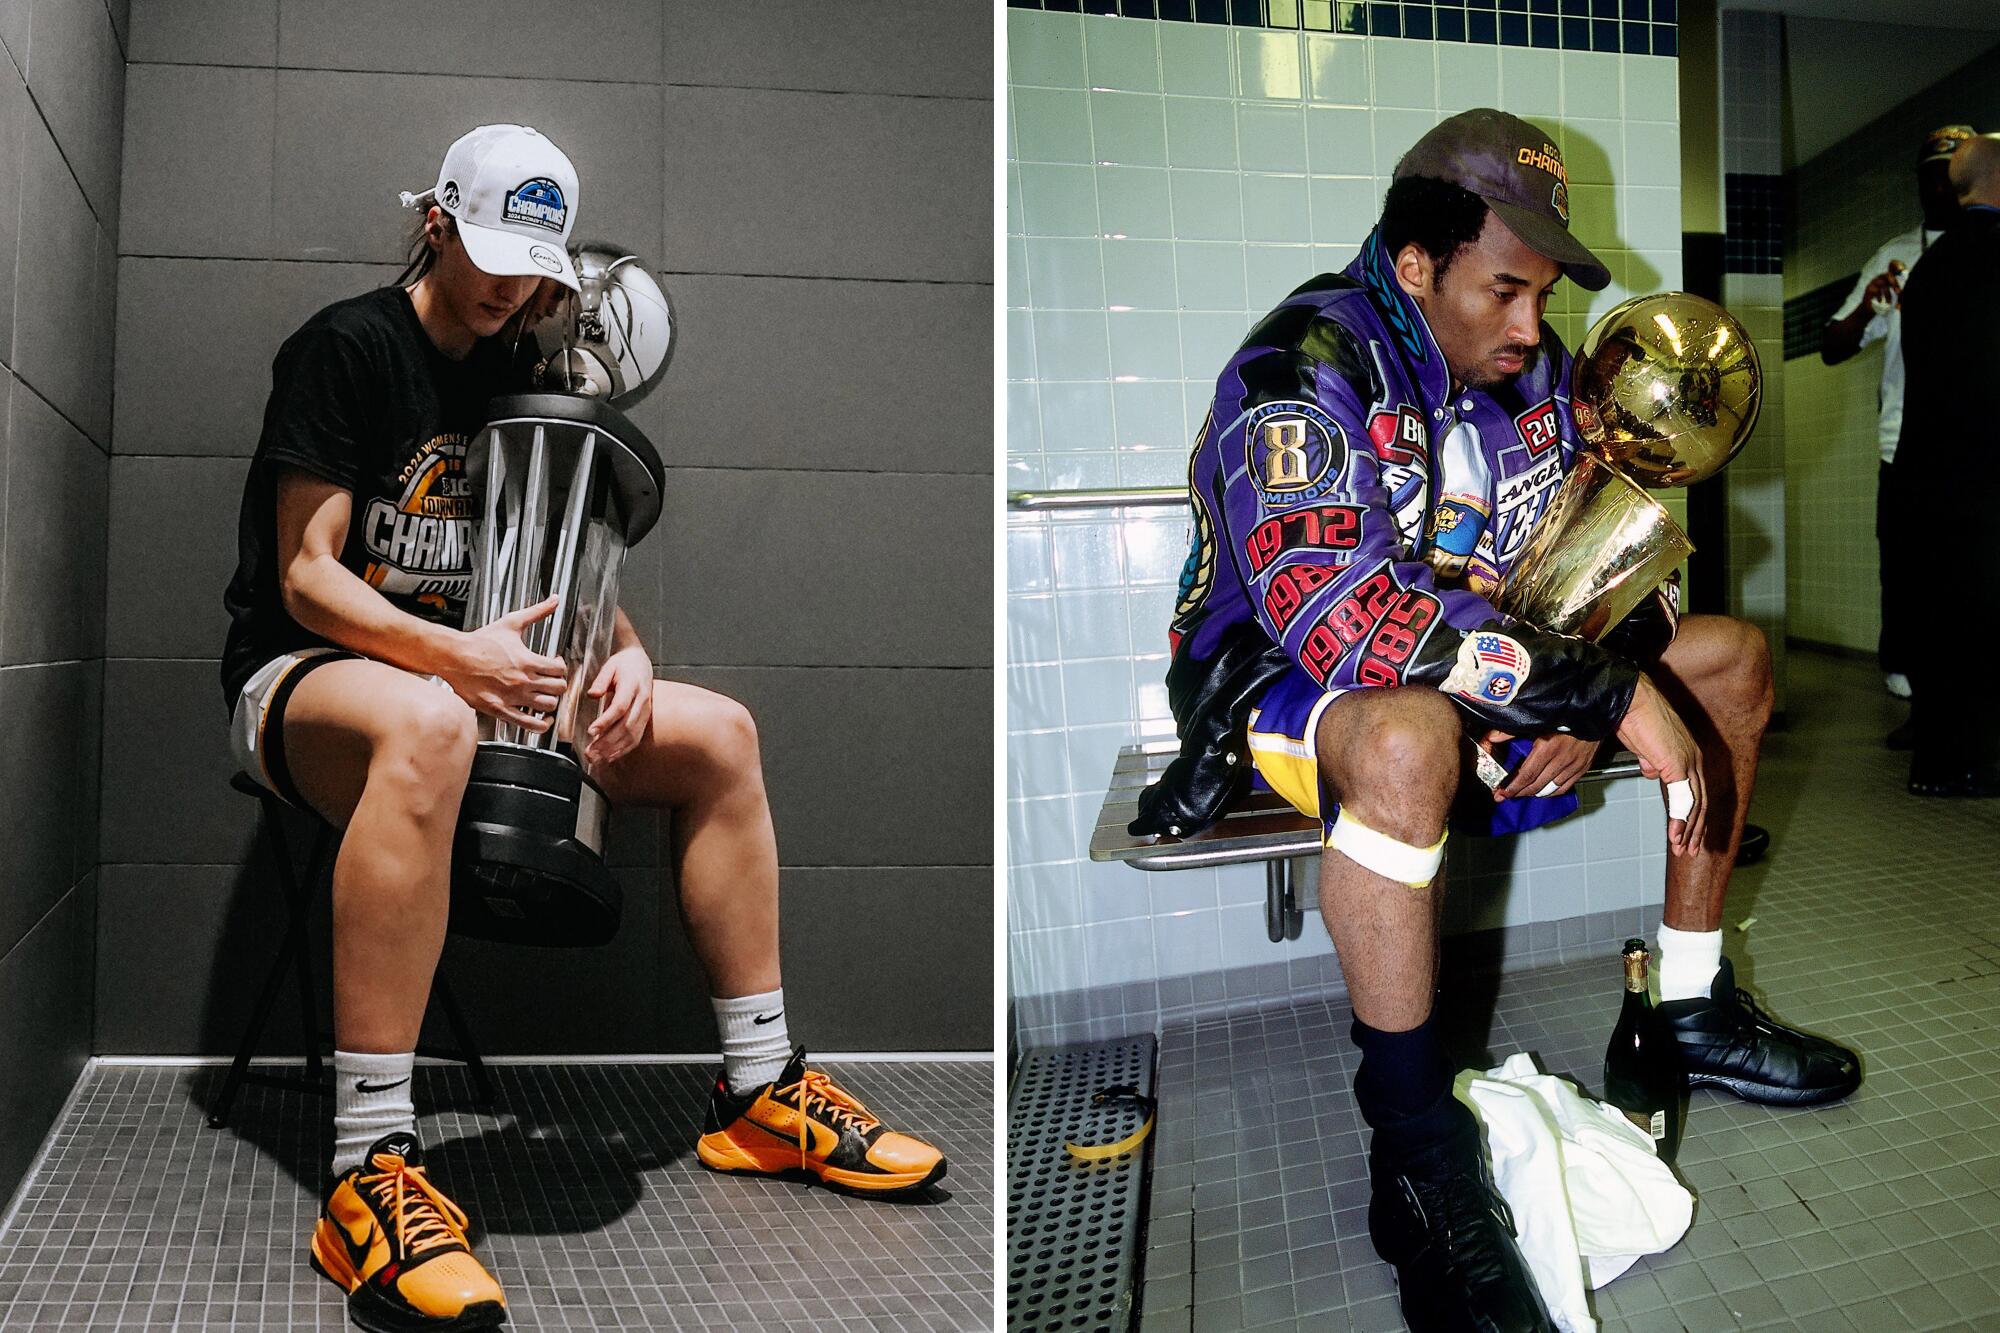 In separate images, Caitlin Clark and Kobe Bryant sit in a shower holding trophies, expressions downcast.